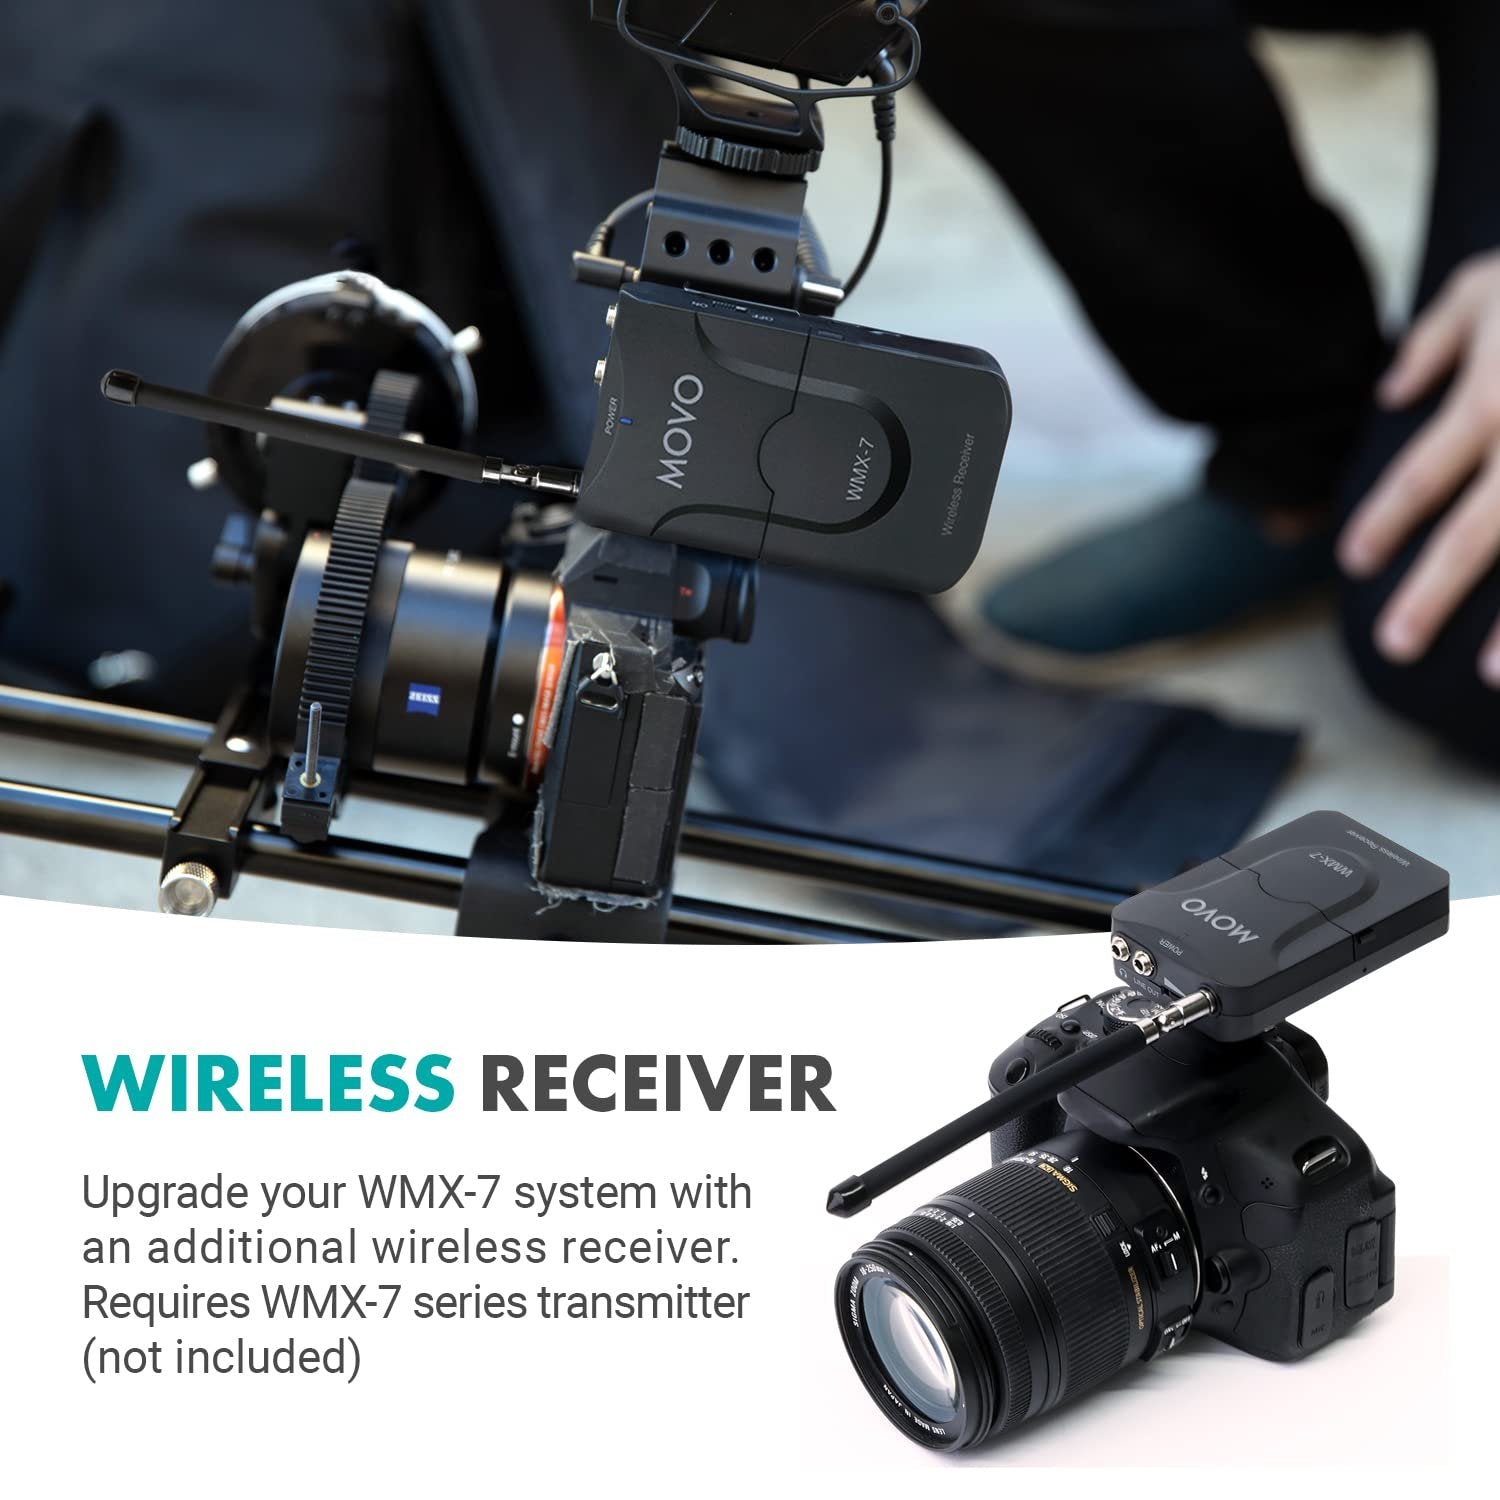 Movo WMX-7 RX Wireless Receiver Only for Microphone System - Bodypack Receiver for Events and Recording